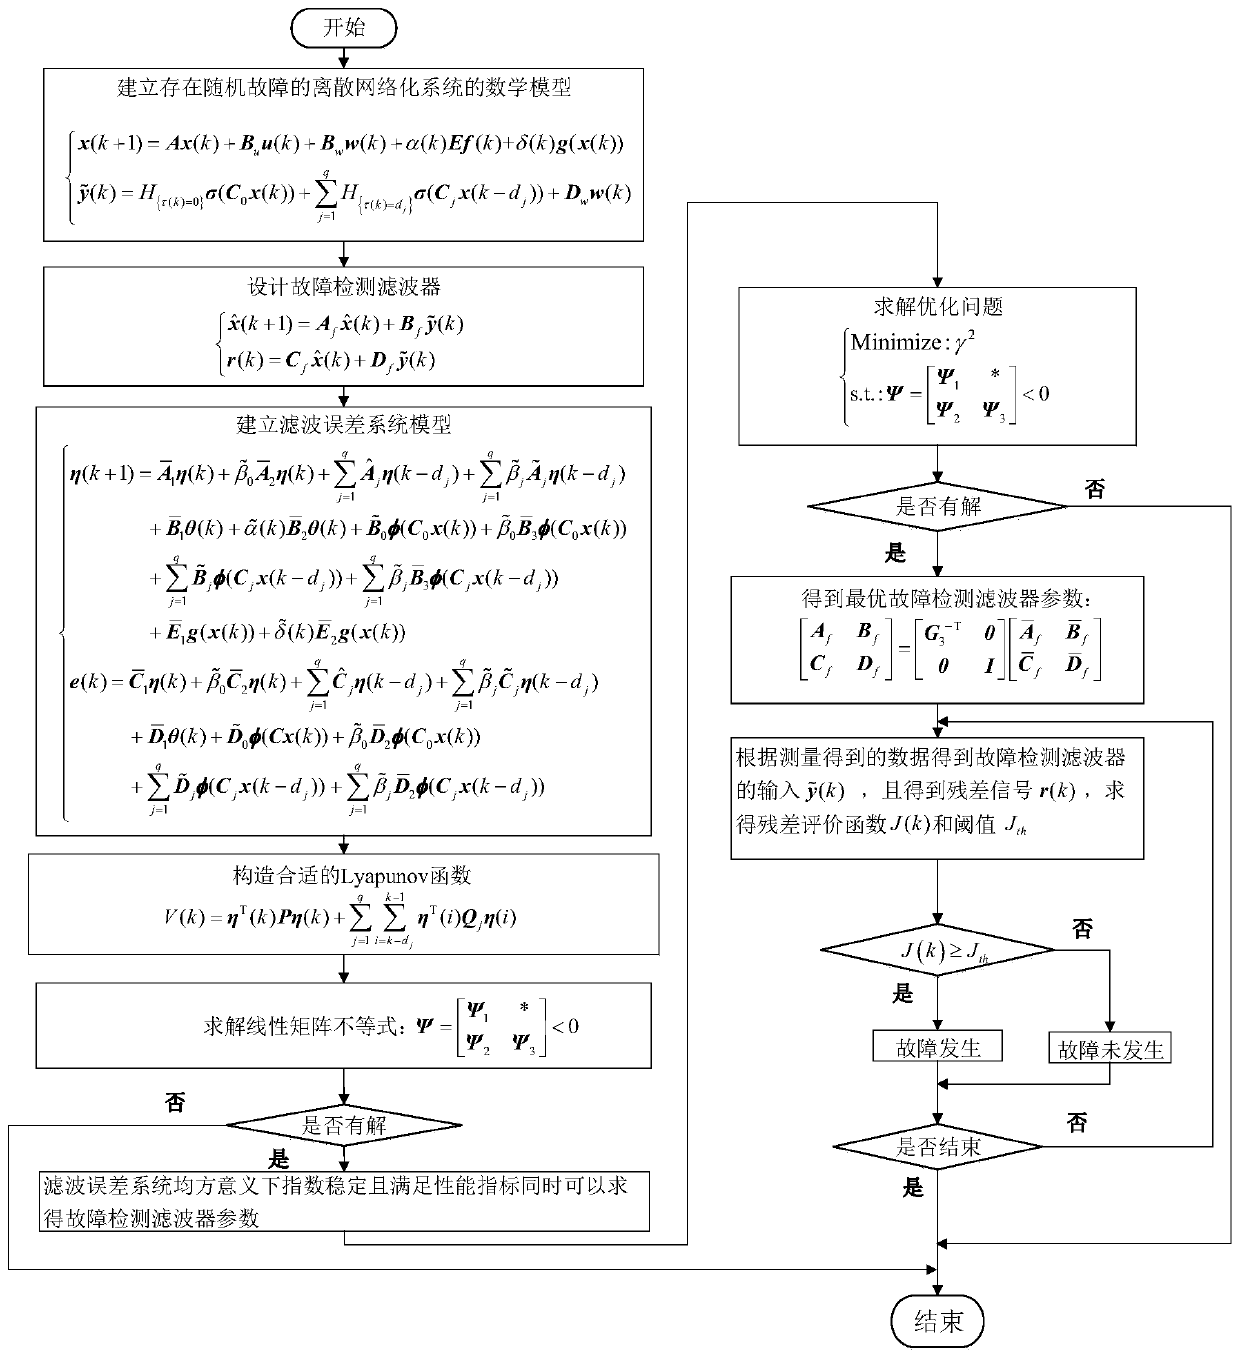 Random fault detection method of nonlinear networked control system